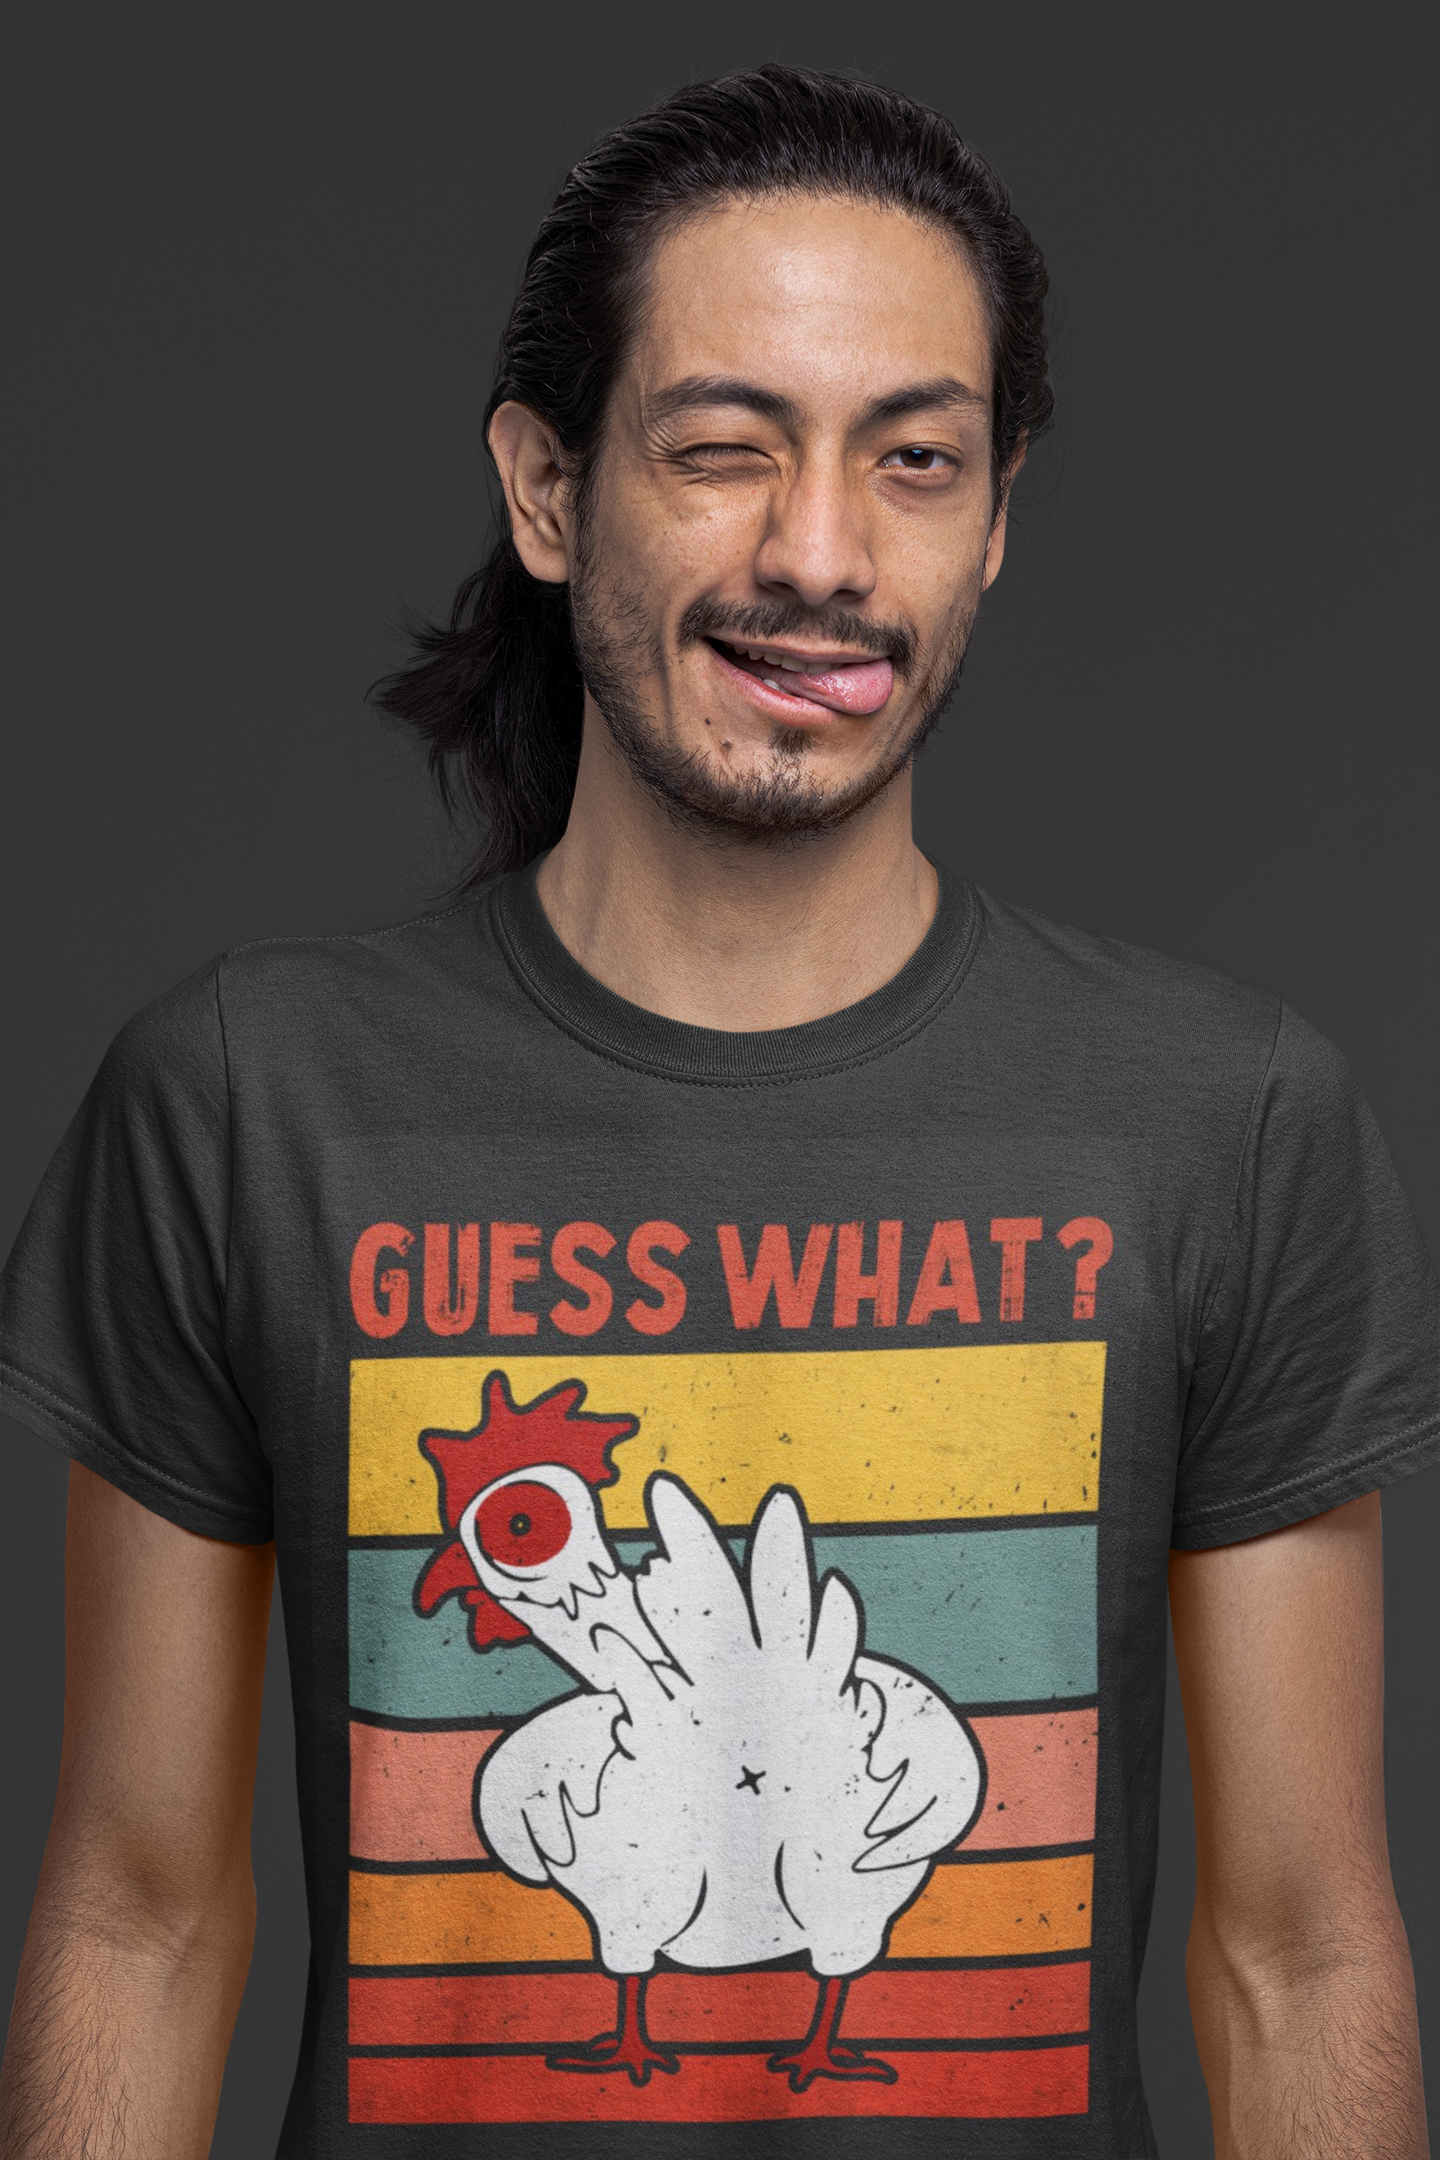 "Guess What? Chicken Butt." Unisex Ultra Cotton Tee - Classic Humor Meets Comfortable Style perfect way to lighten the mood at casual gatherings